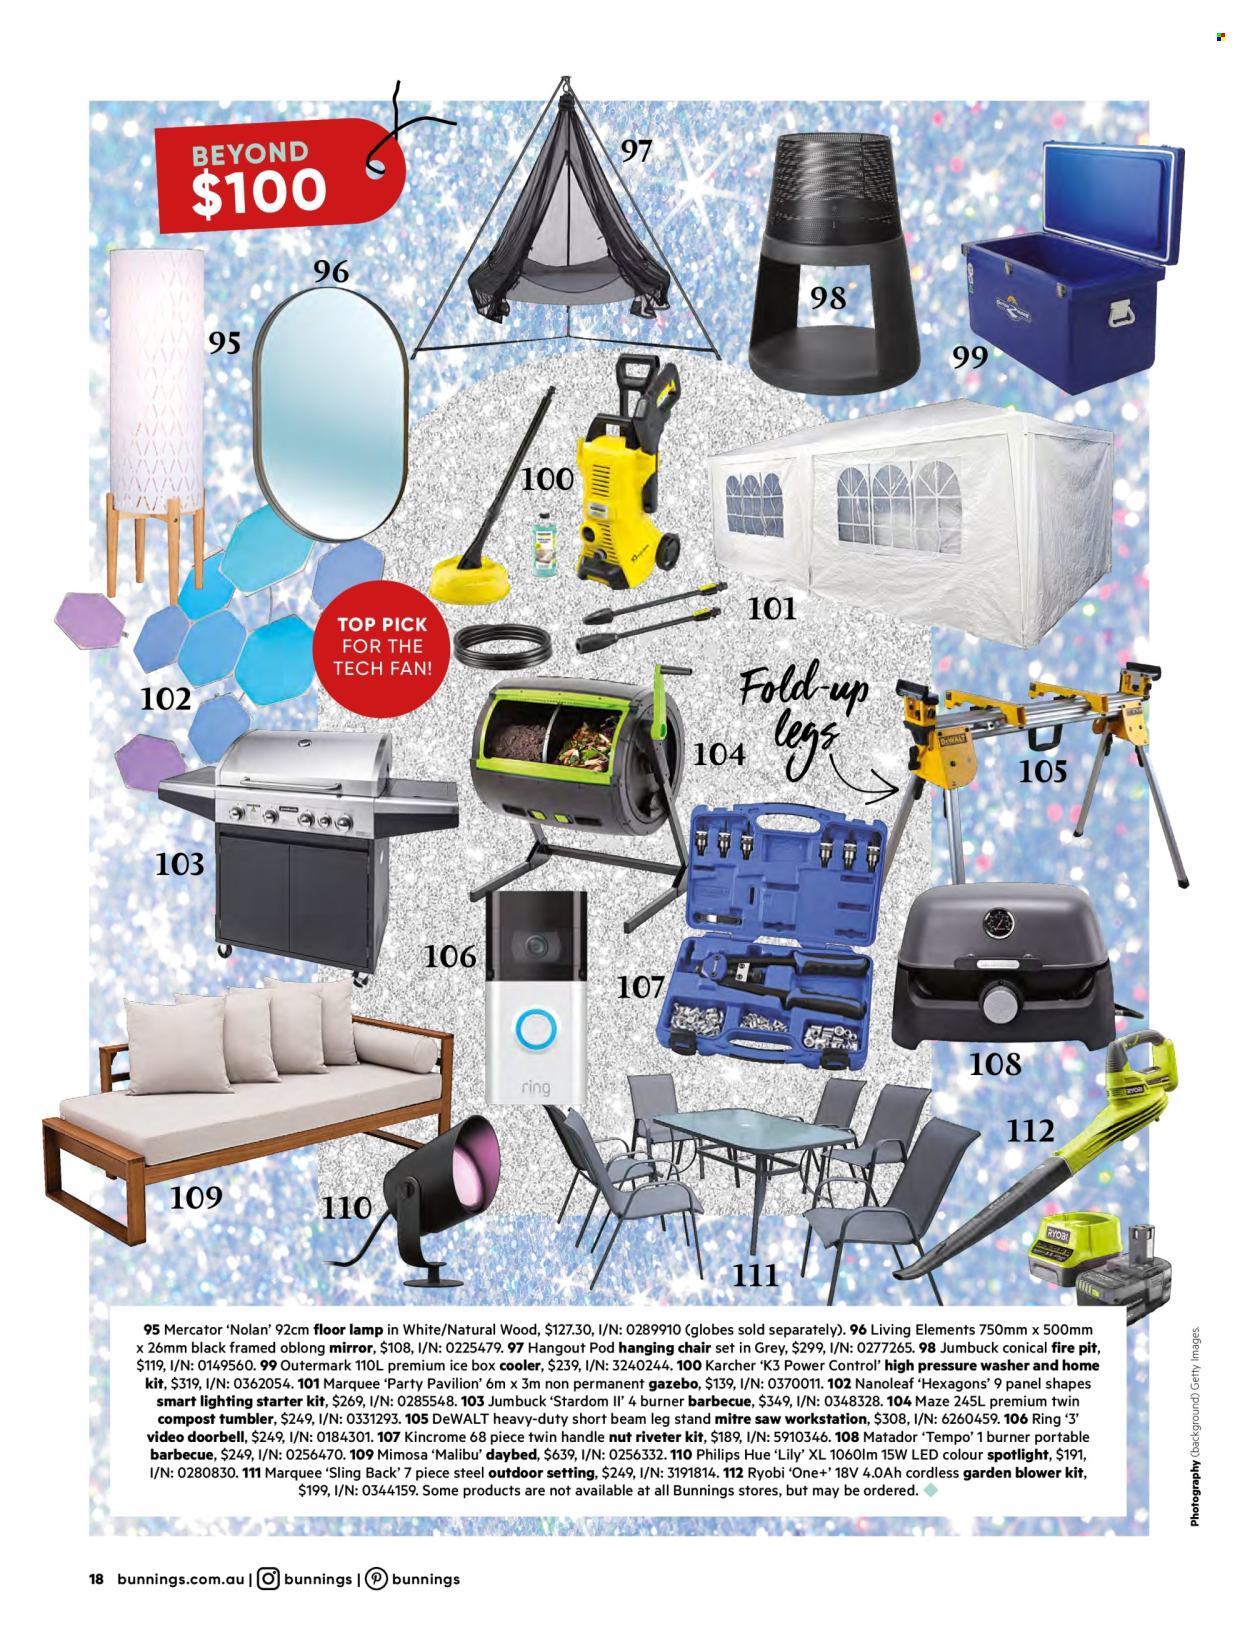 thumbnail - Bunnings Warehouse Catalogue - Sales products - chair, daybed, mirror, Philips, tumbler, ice box, spotlight, lamp, lighting, floor lamp, DeWALT, Ryobi, saw, blower, pressure washer, Kärcher, gazebo, pavilion, fire bowl, portable barbecue, compost. Page 18.